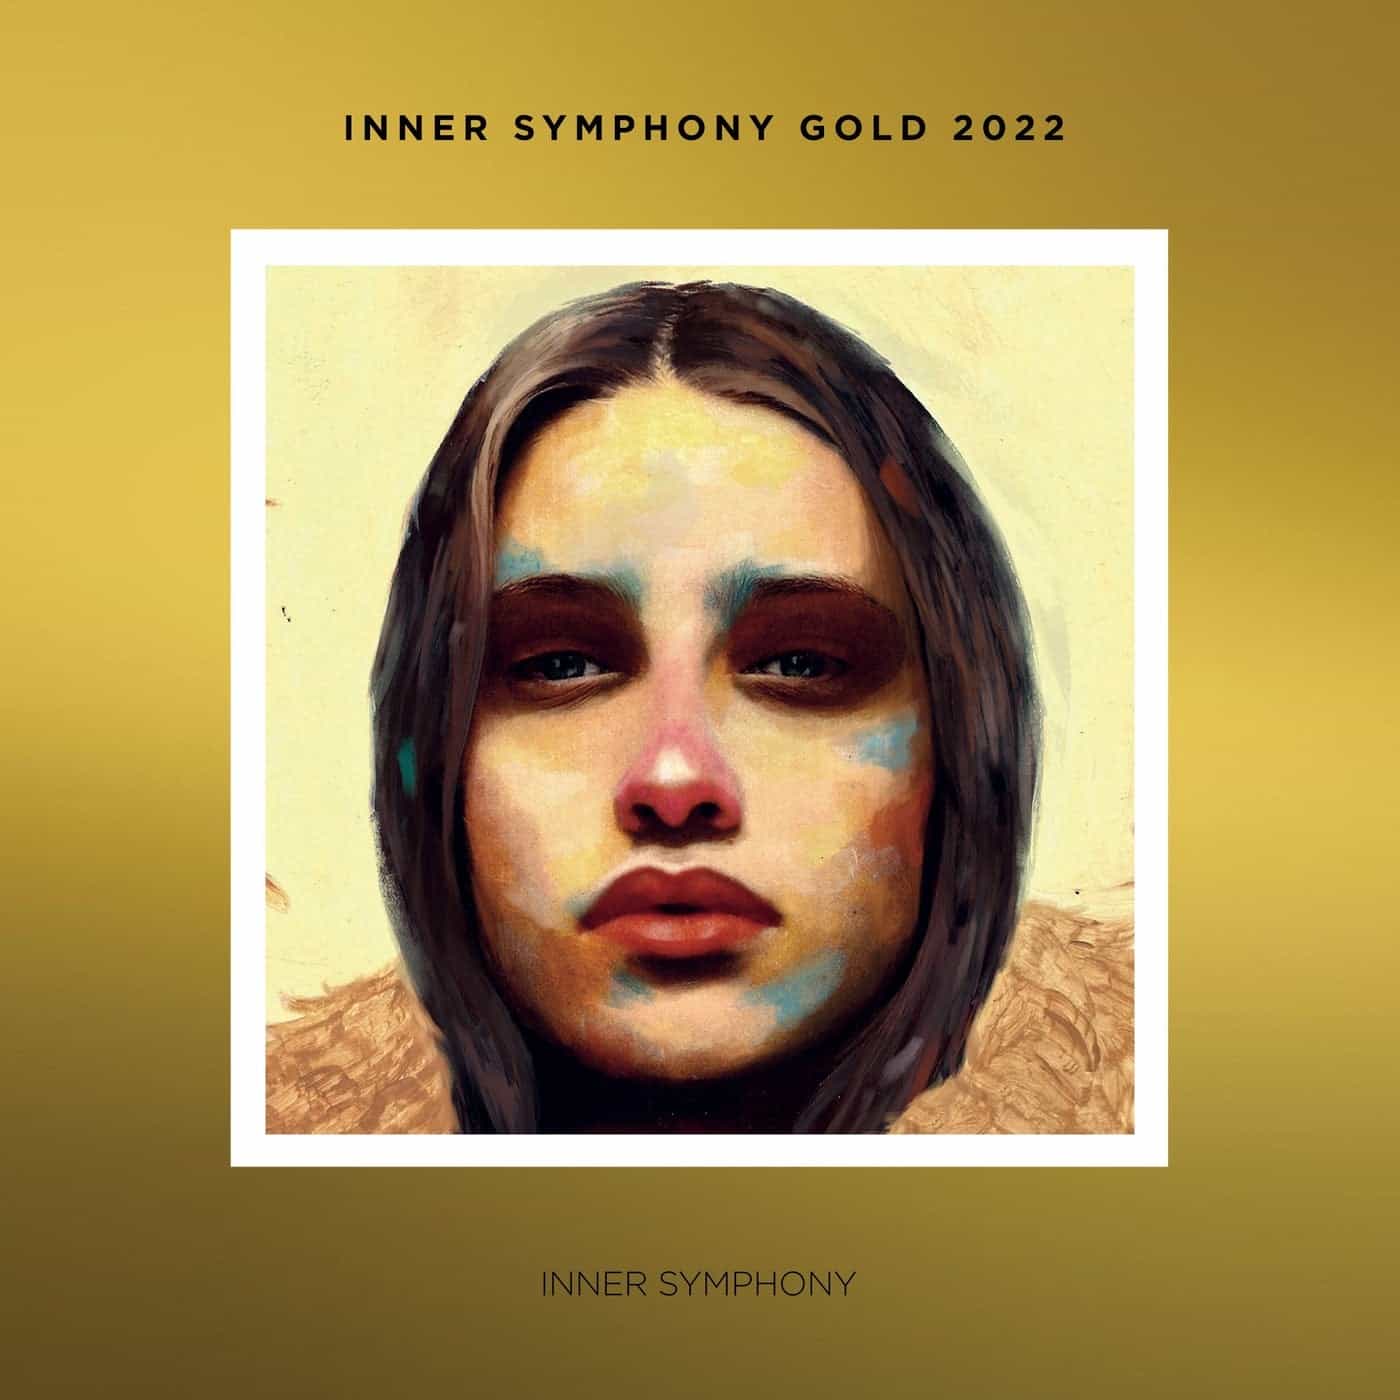 image cover: VA - Inner Symphony Gold 2022 / IS071